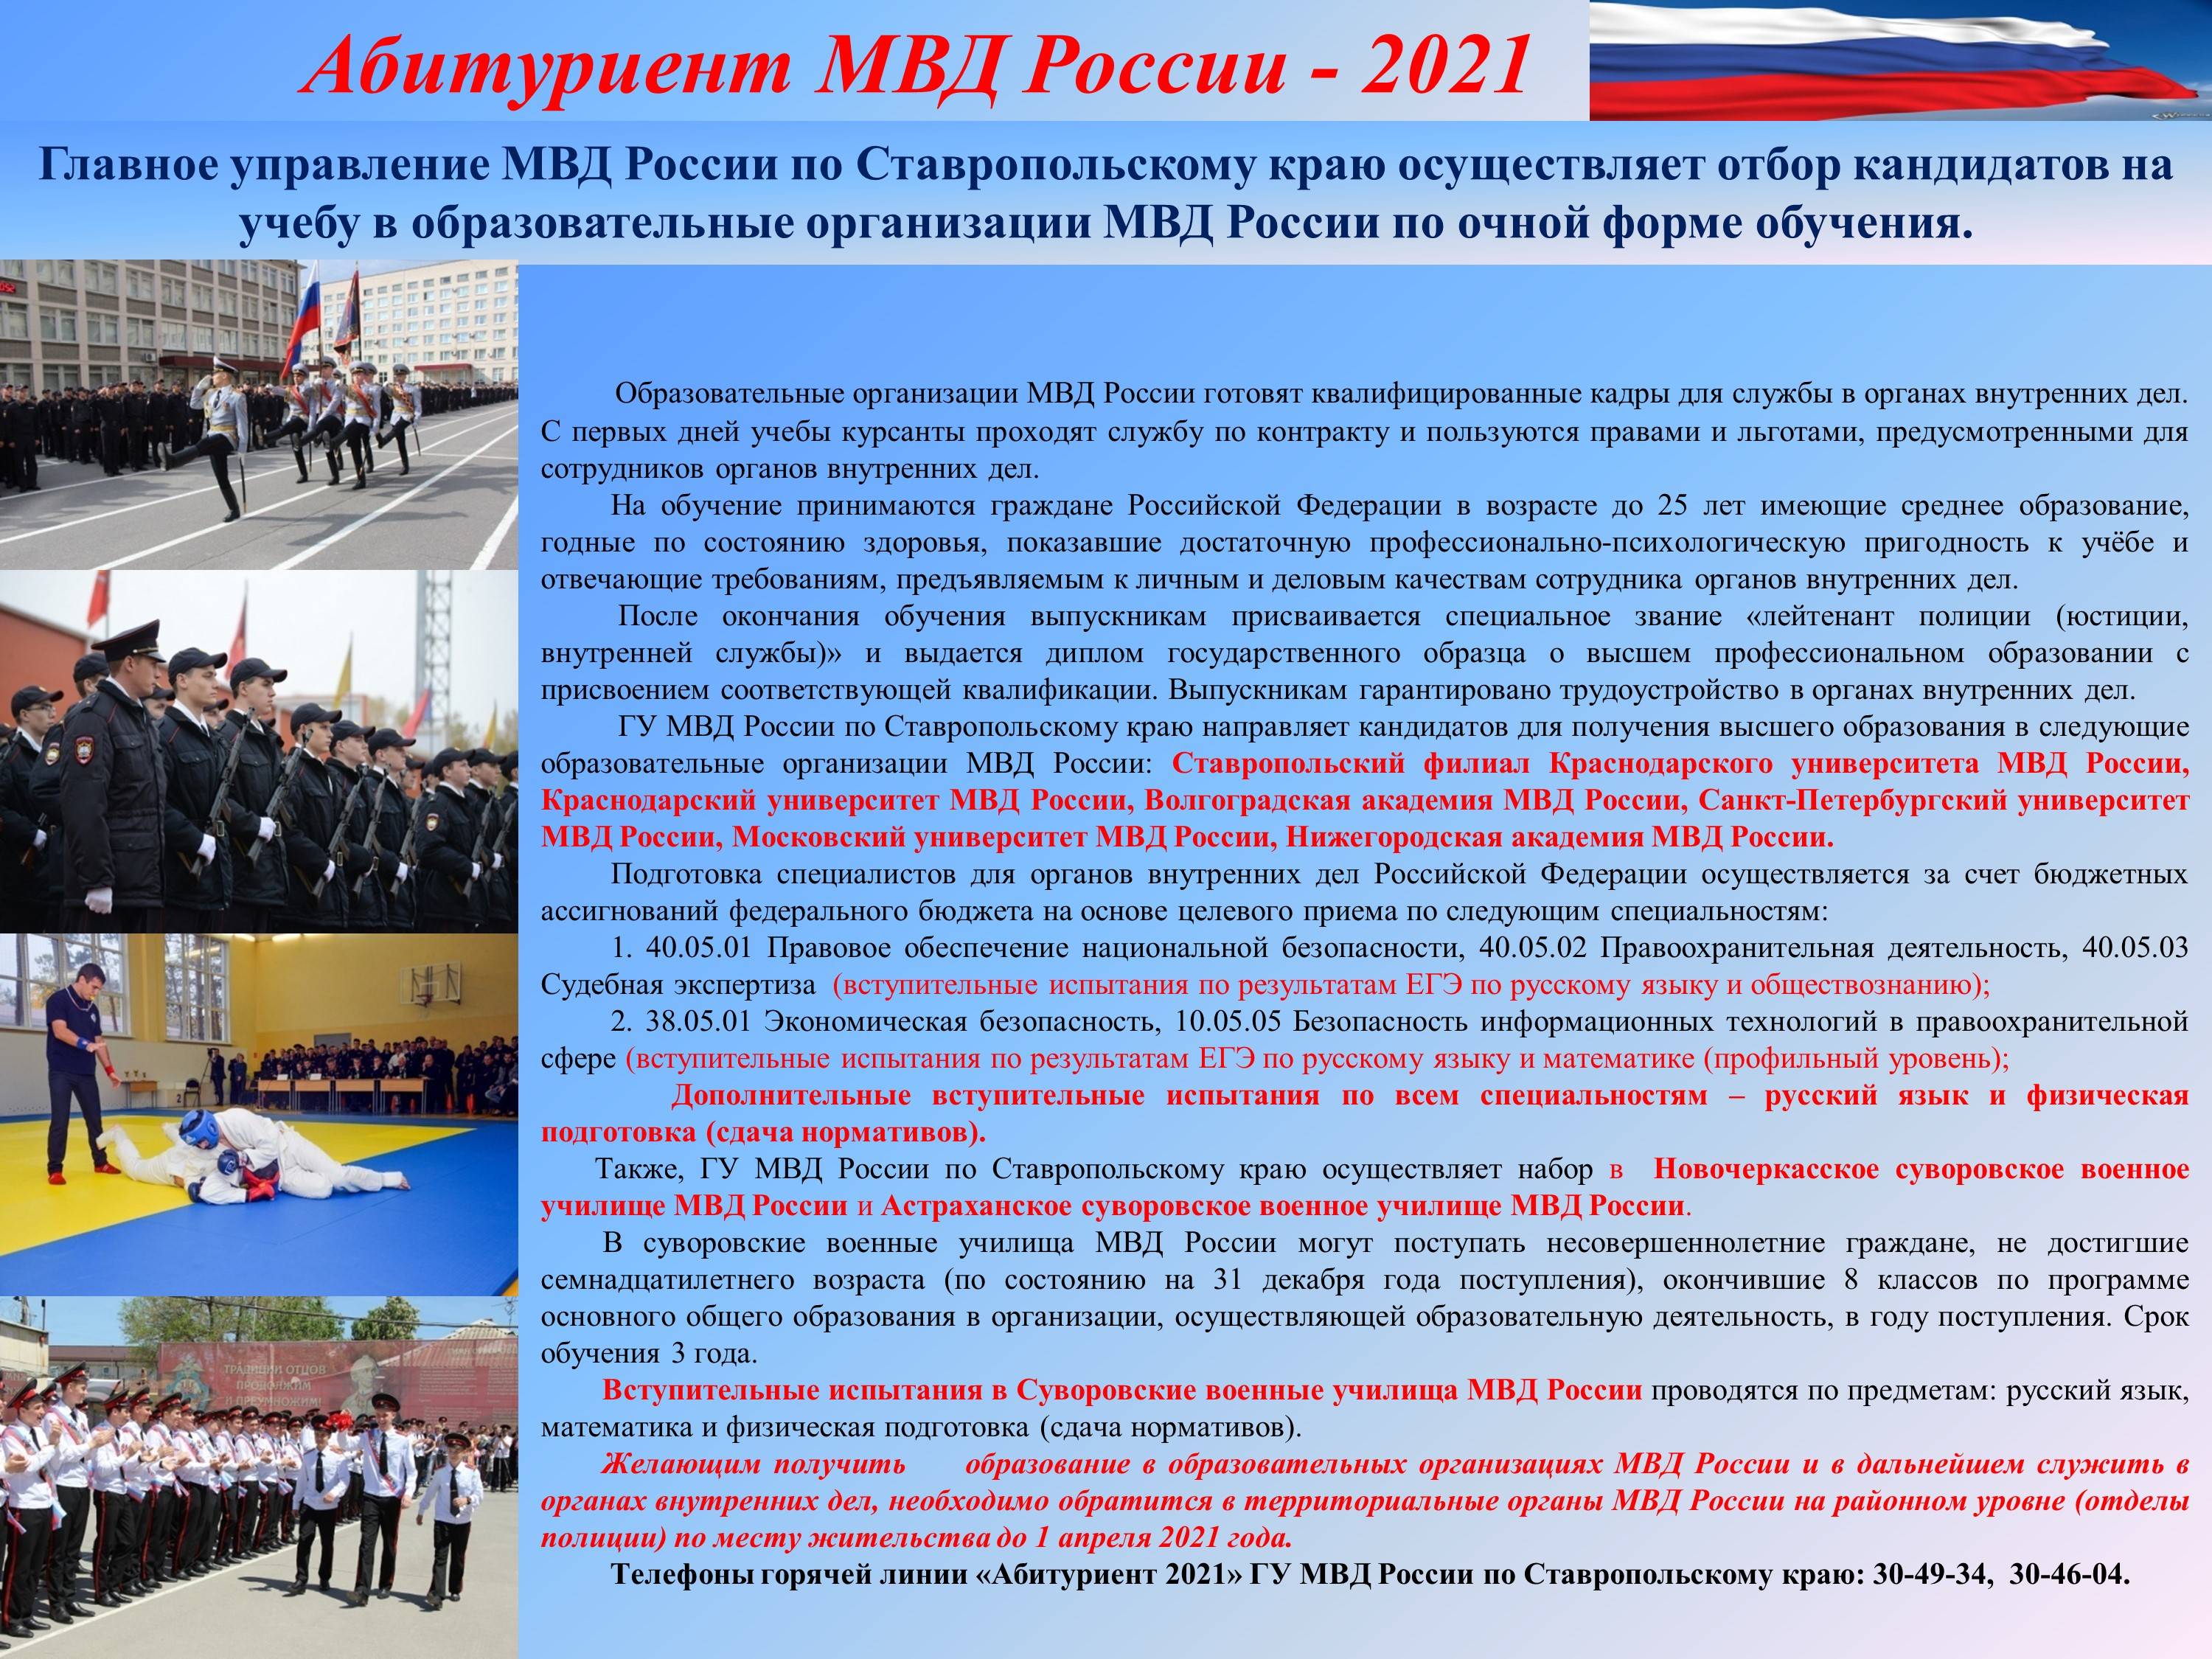 Russian president scholarship competition for study abroad